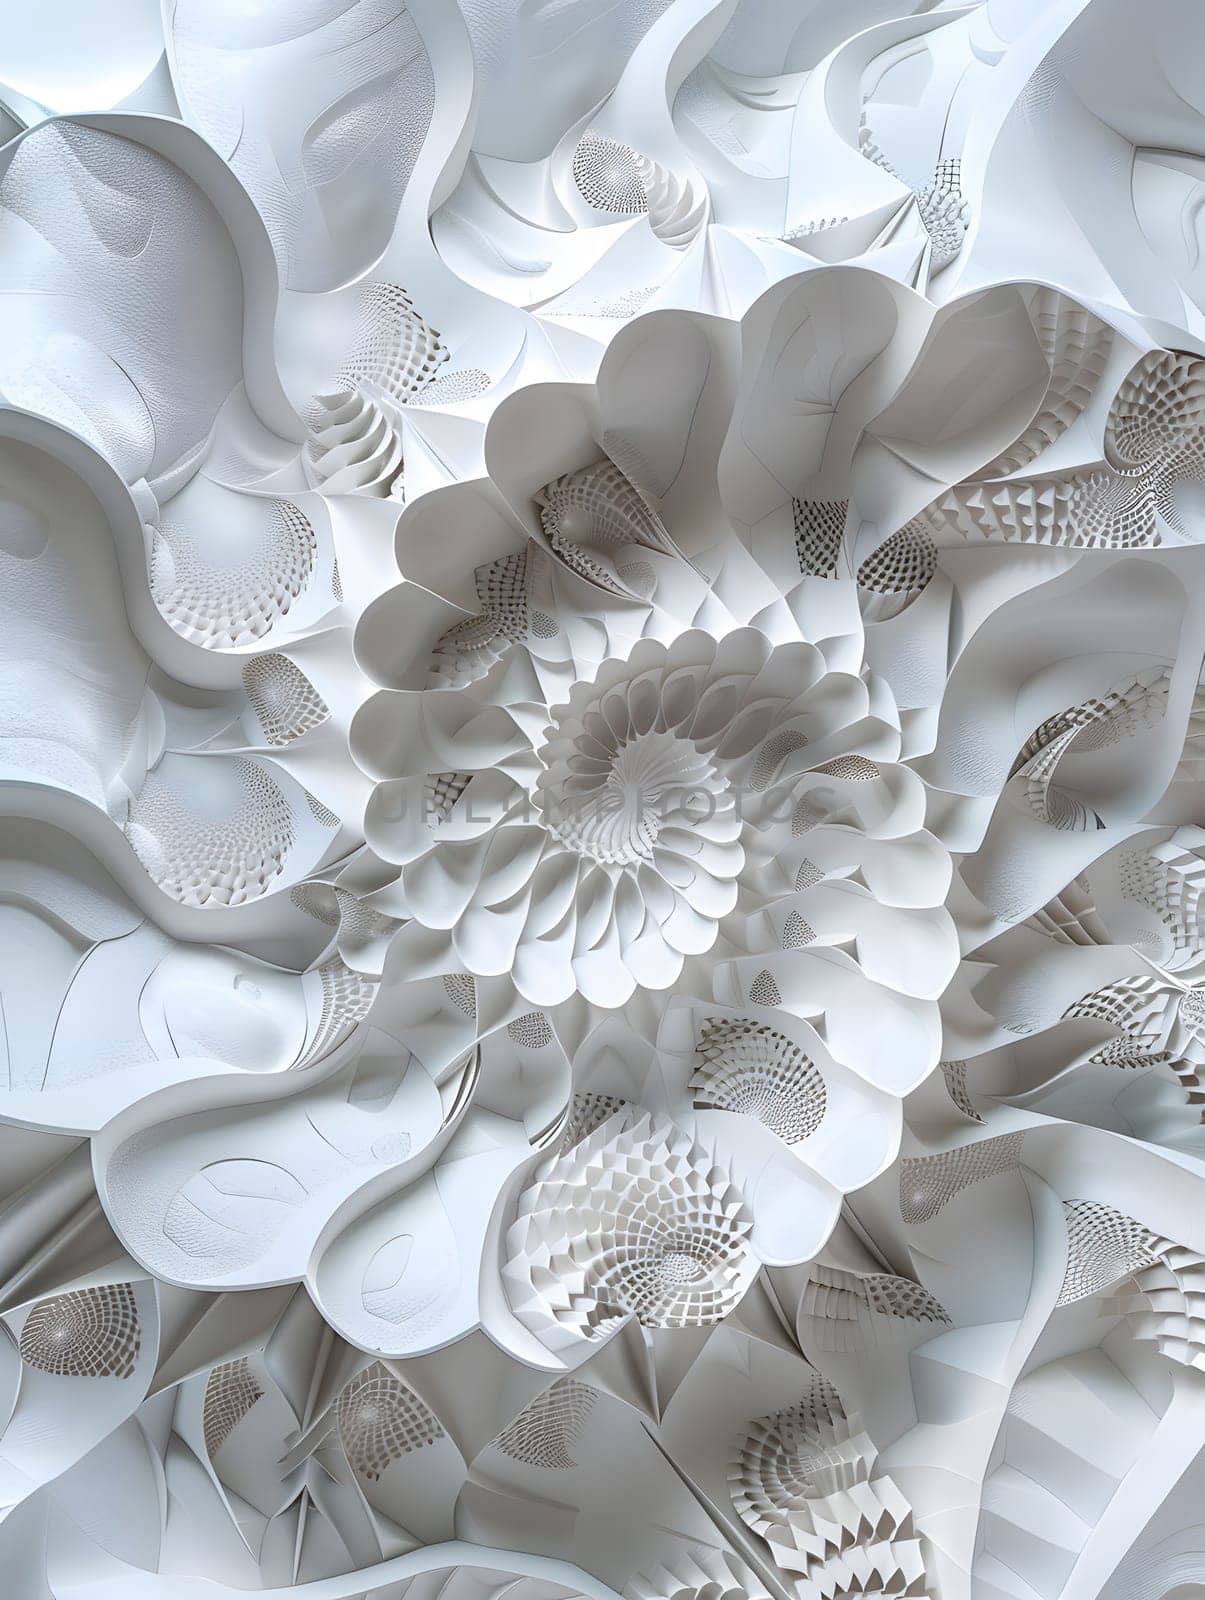 Closeup of a white flower sculpture, a beautiful plant motif in art by Nadtochiy